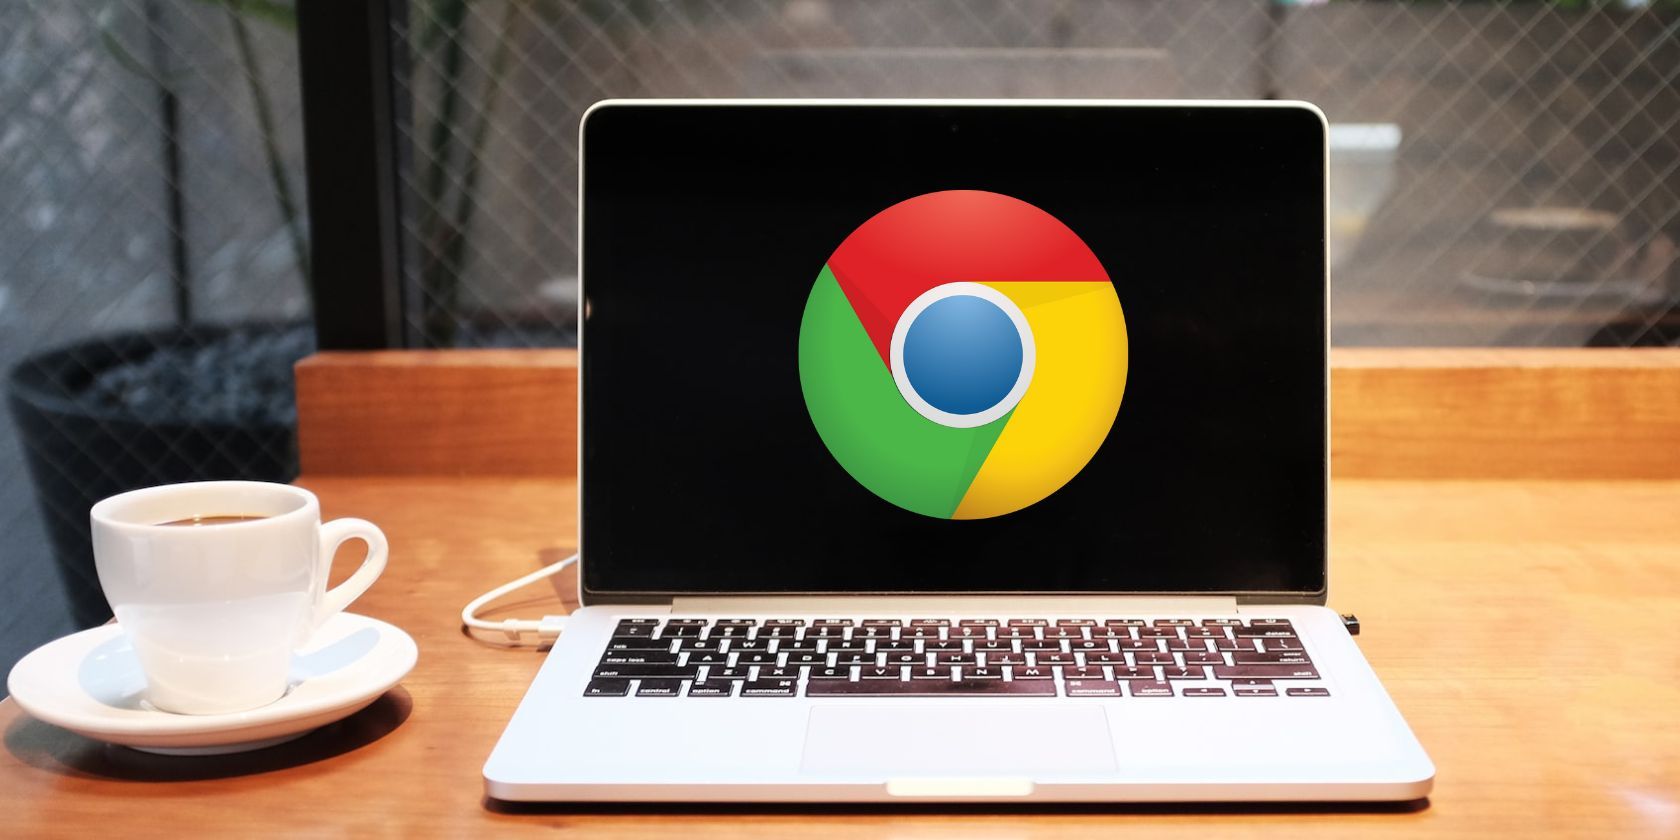 Silver laptop with Google Chrome logo on screen